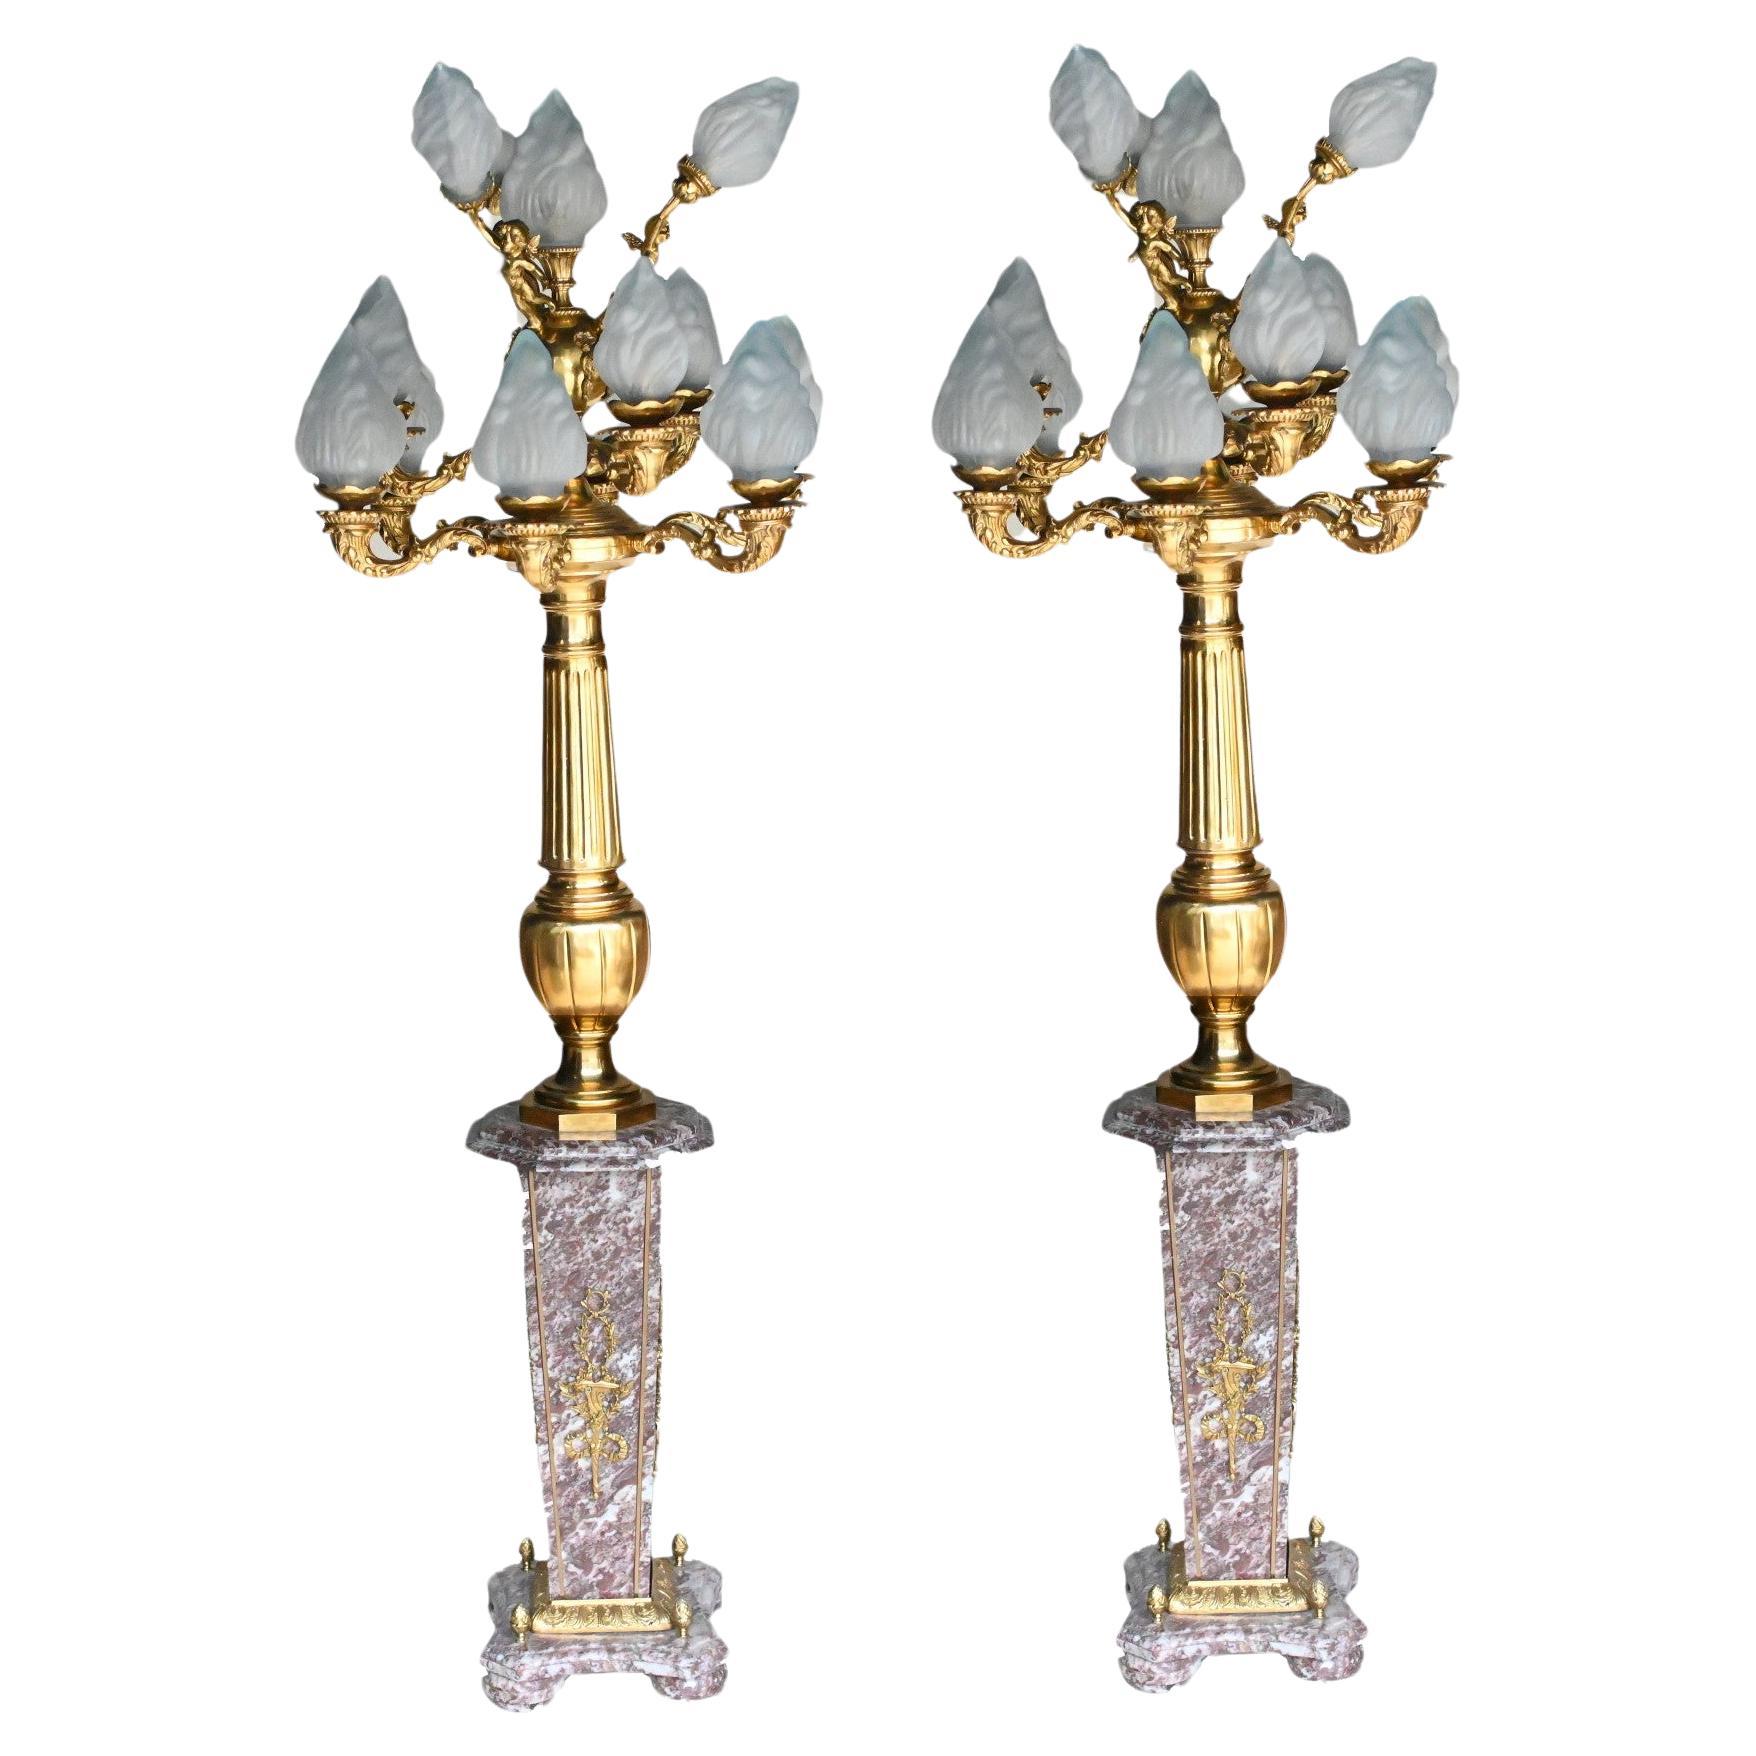 Pair Big French Floor Lamps Marble Gilt Architectural Lights Candelabras